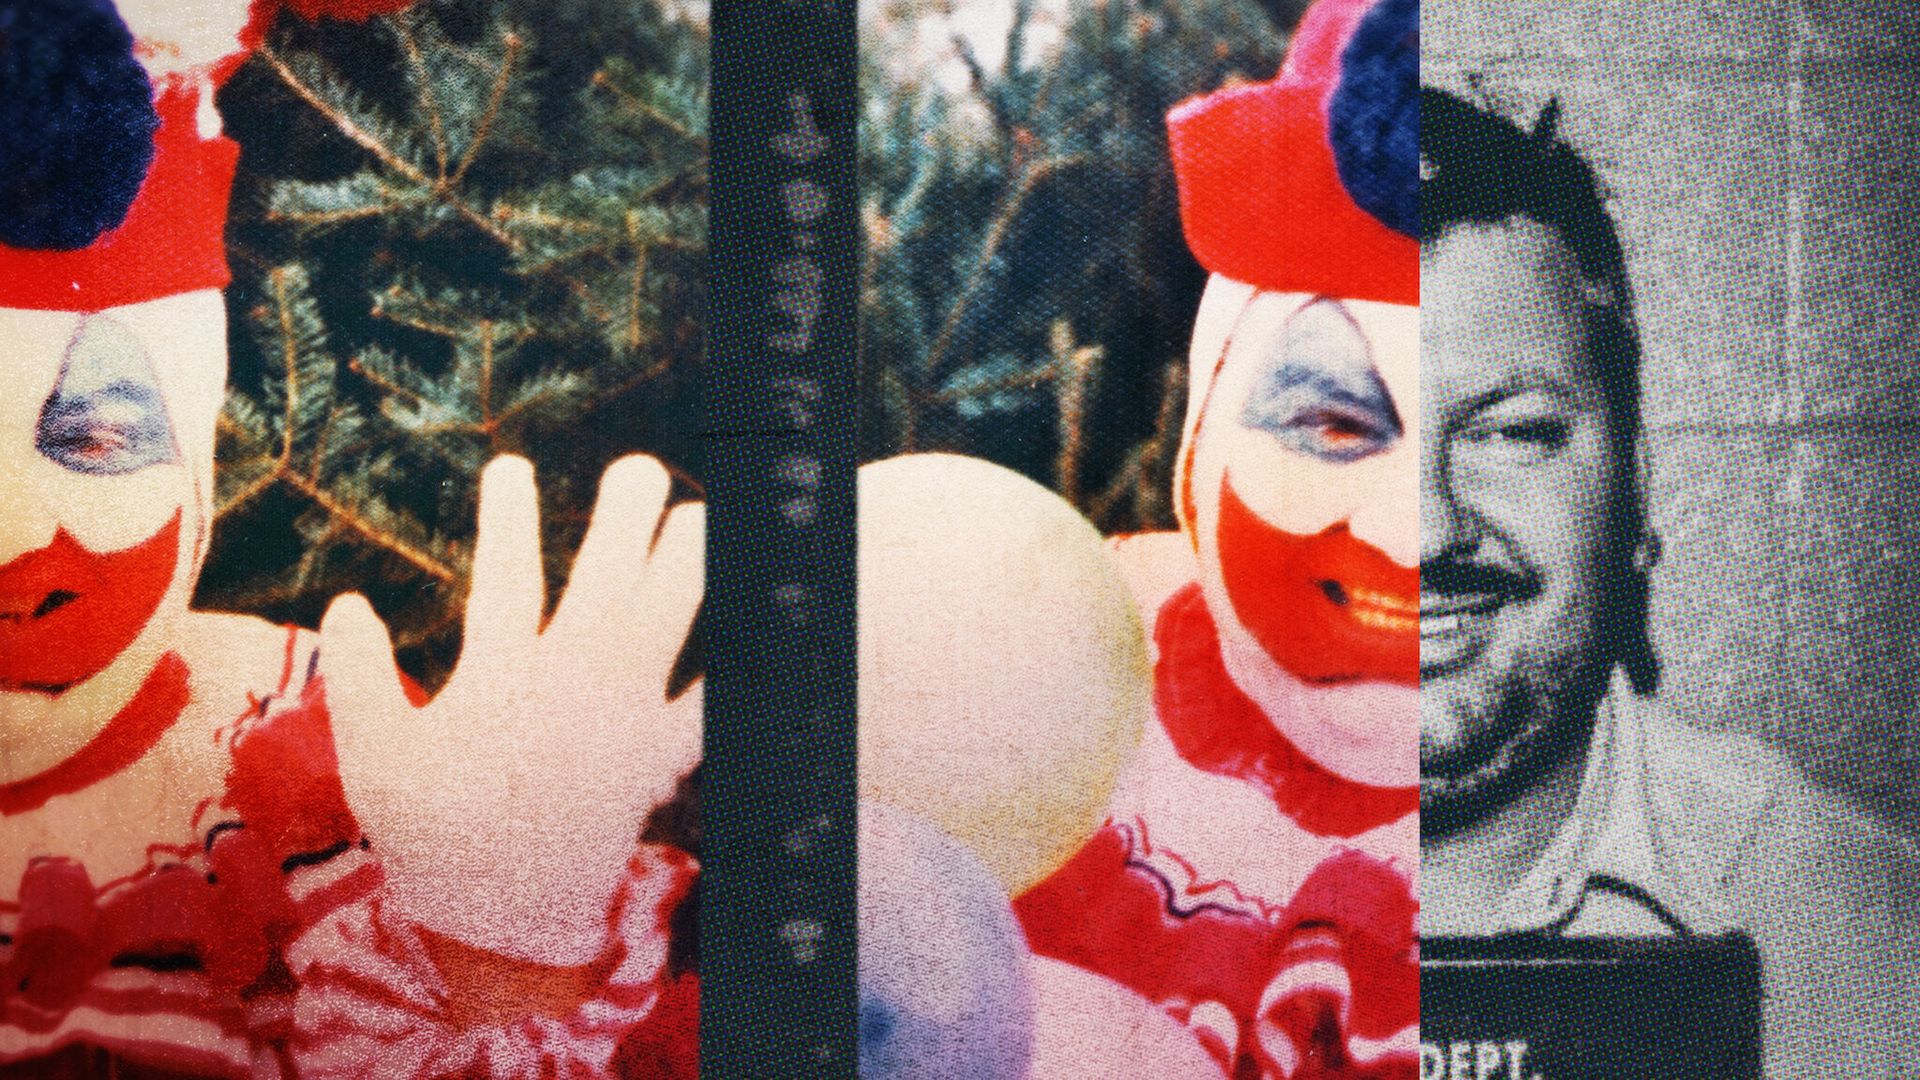 Conversations with a Killer: The John Wayne Gacy Tapes background